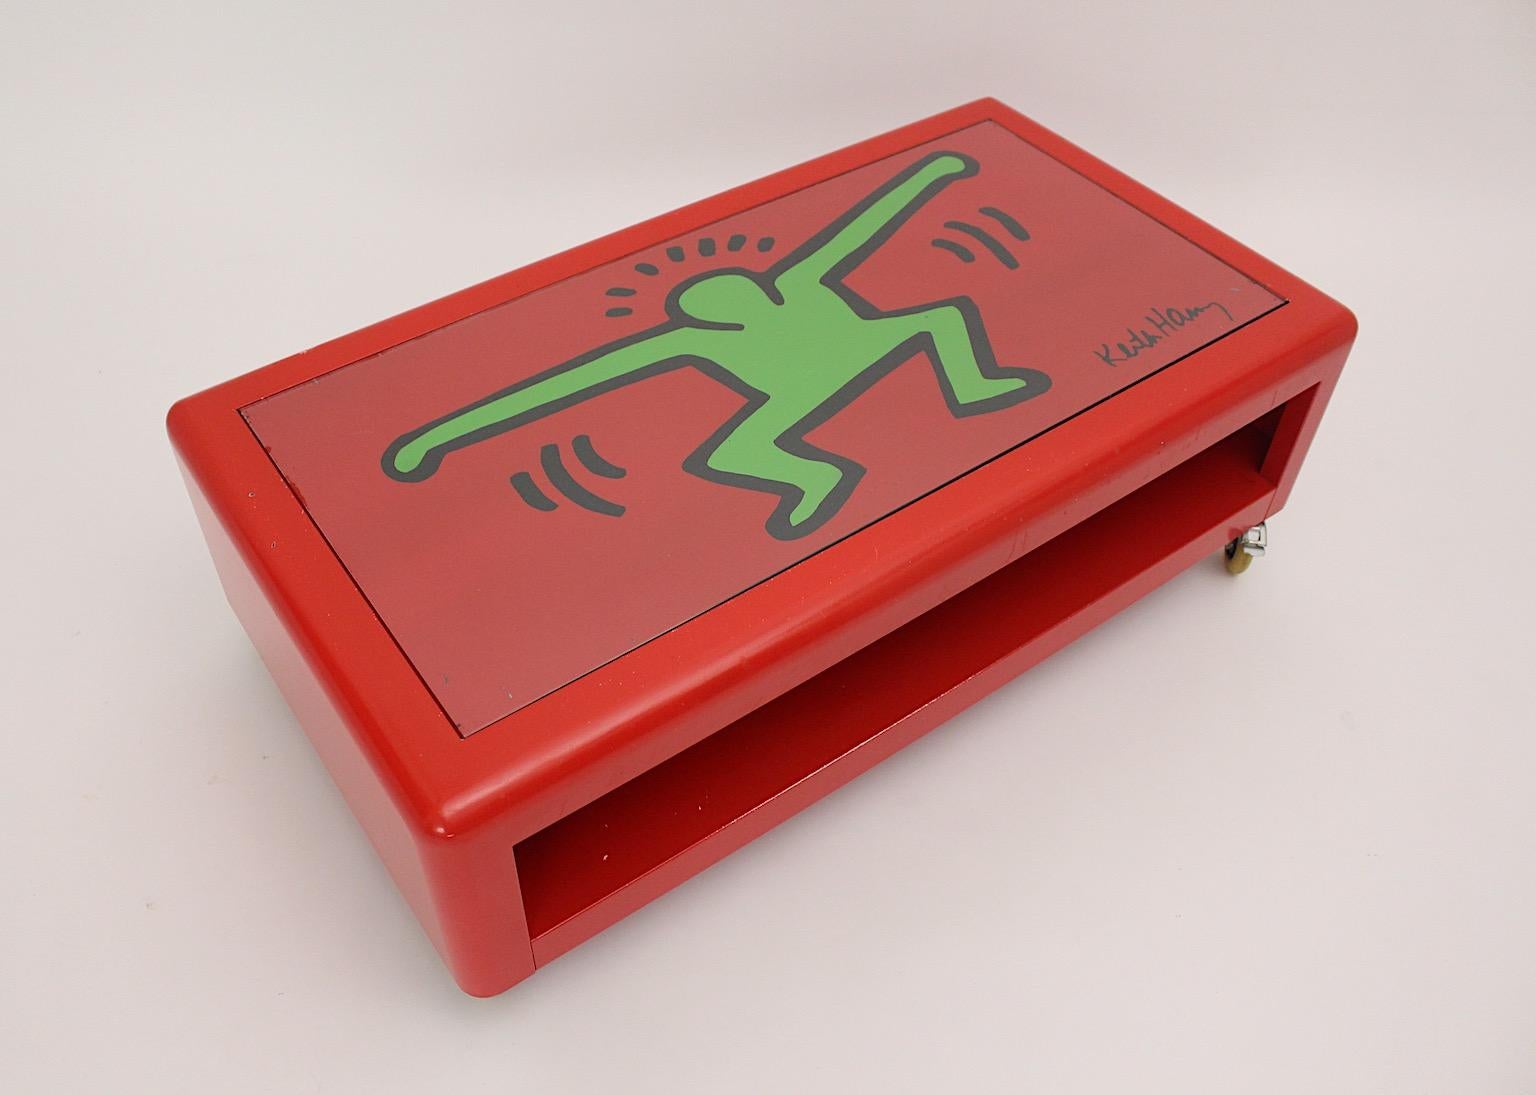 Keith Haring 'After' Low Pop Art Sofa Table Red Metal Bretz 1998 Germany For Sale 2